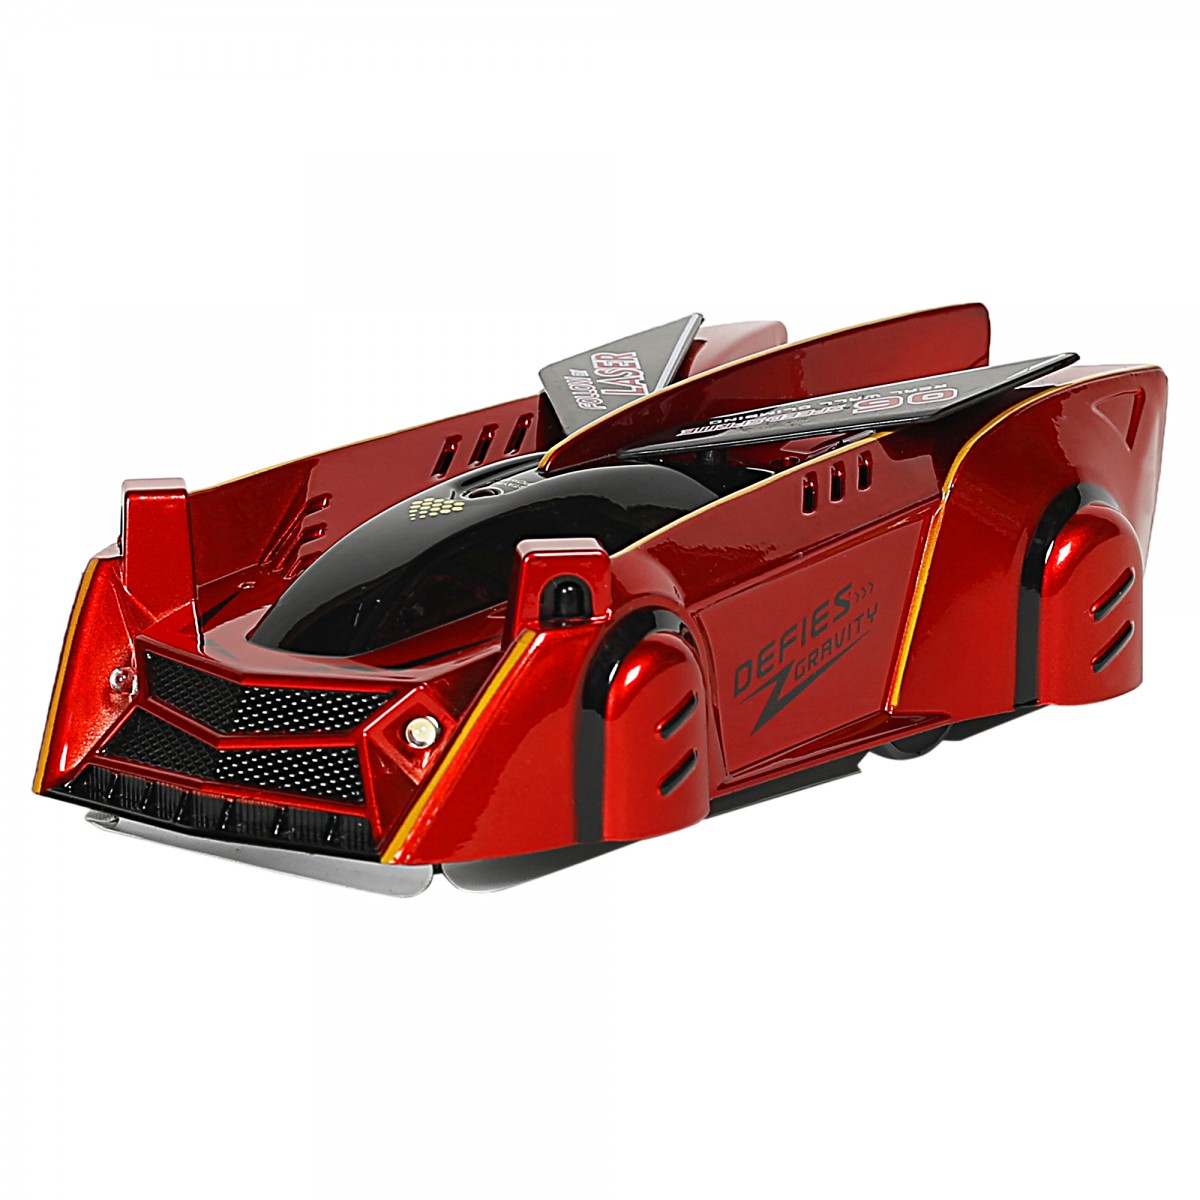 Ralleyz Laser Wall Climbing Rc Red Red 8Y+